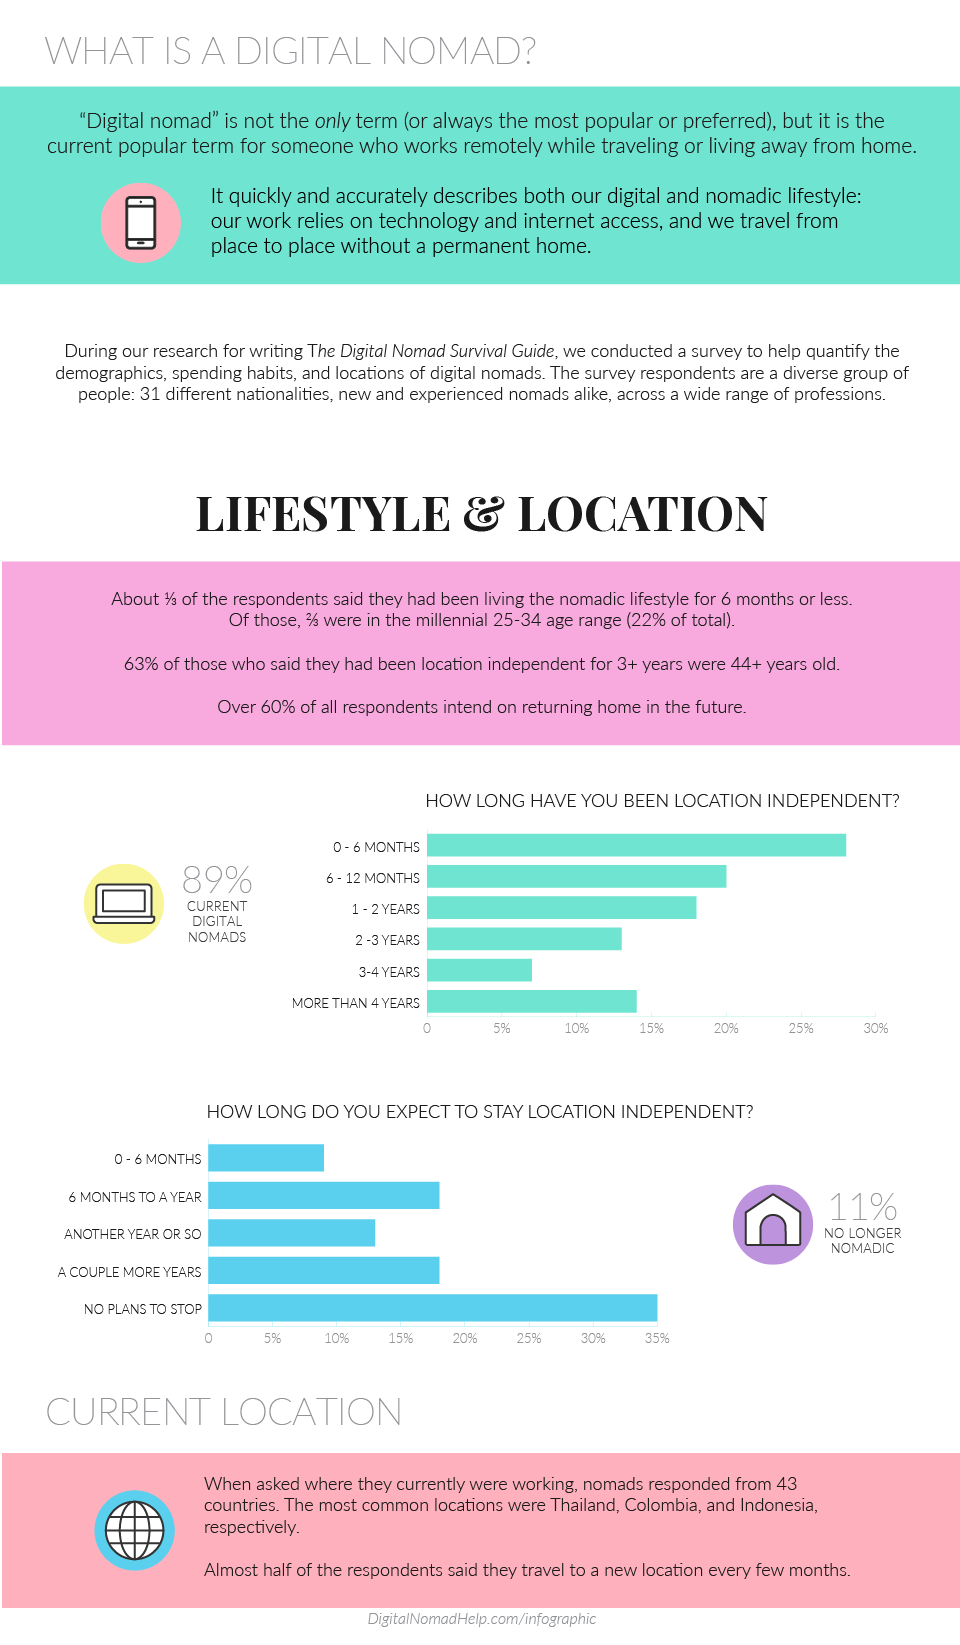 DN_Census_Infographic_indiv_Lifestyle copy.png